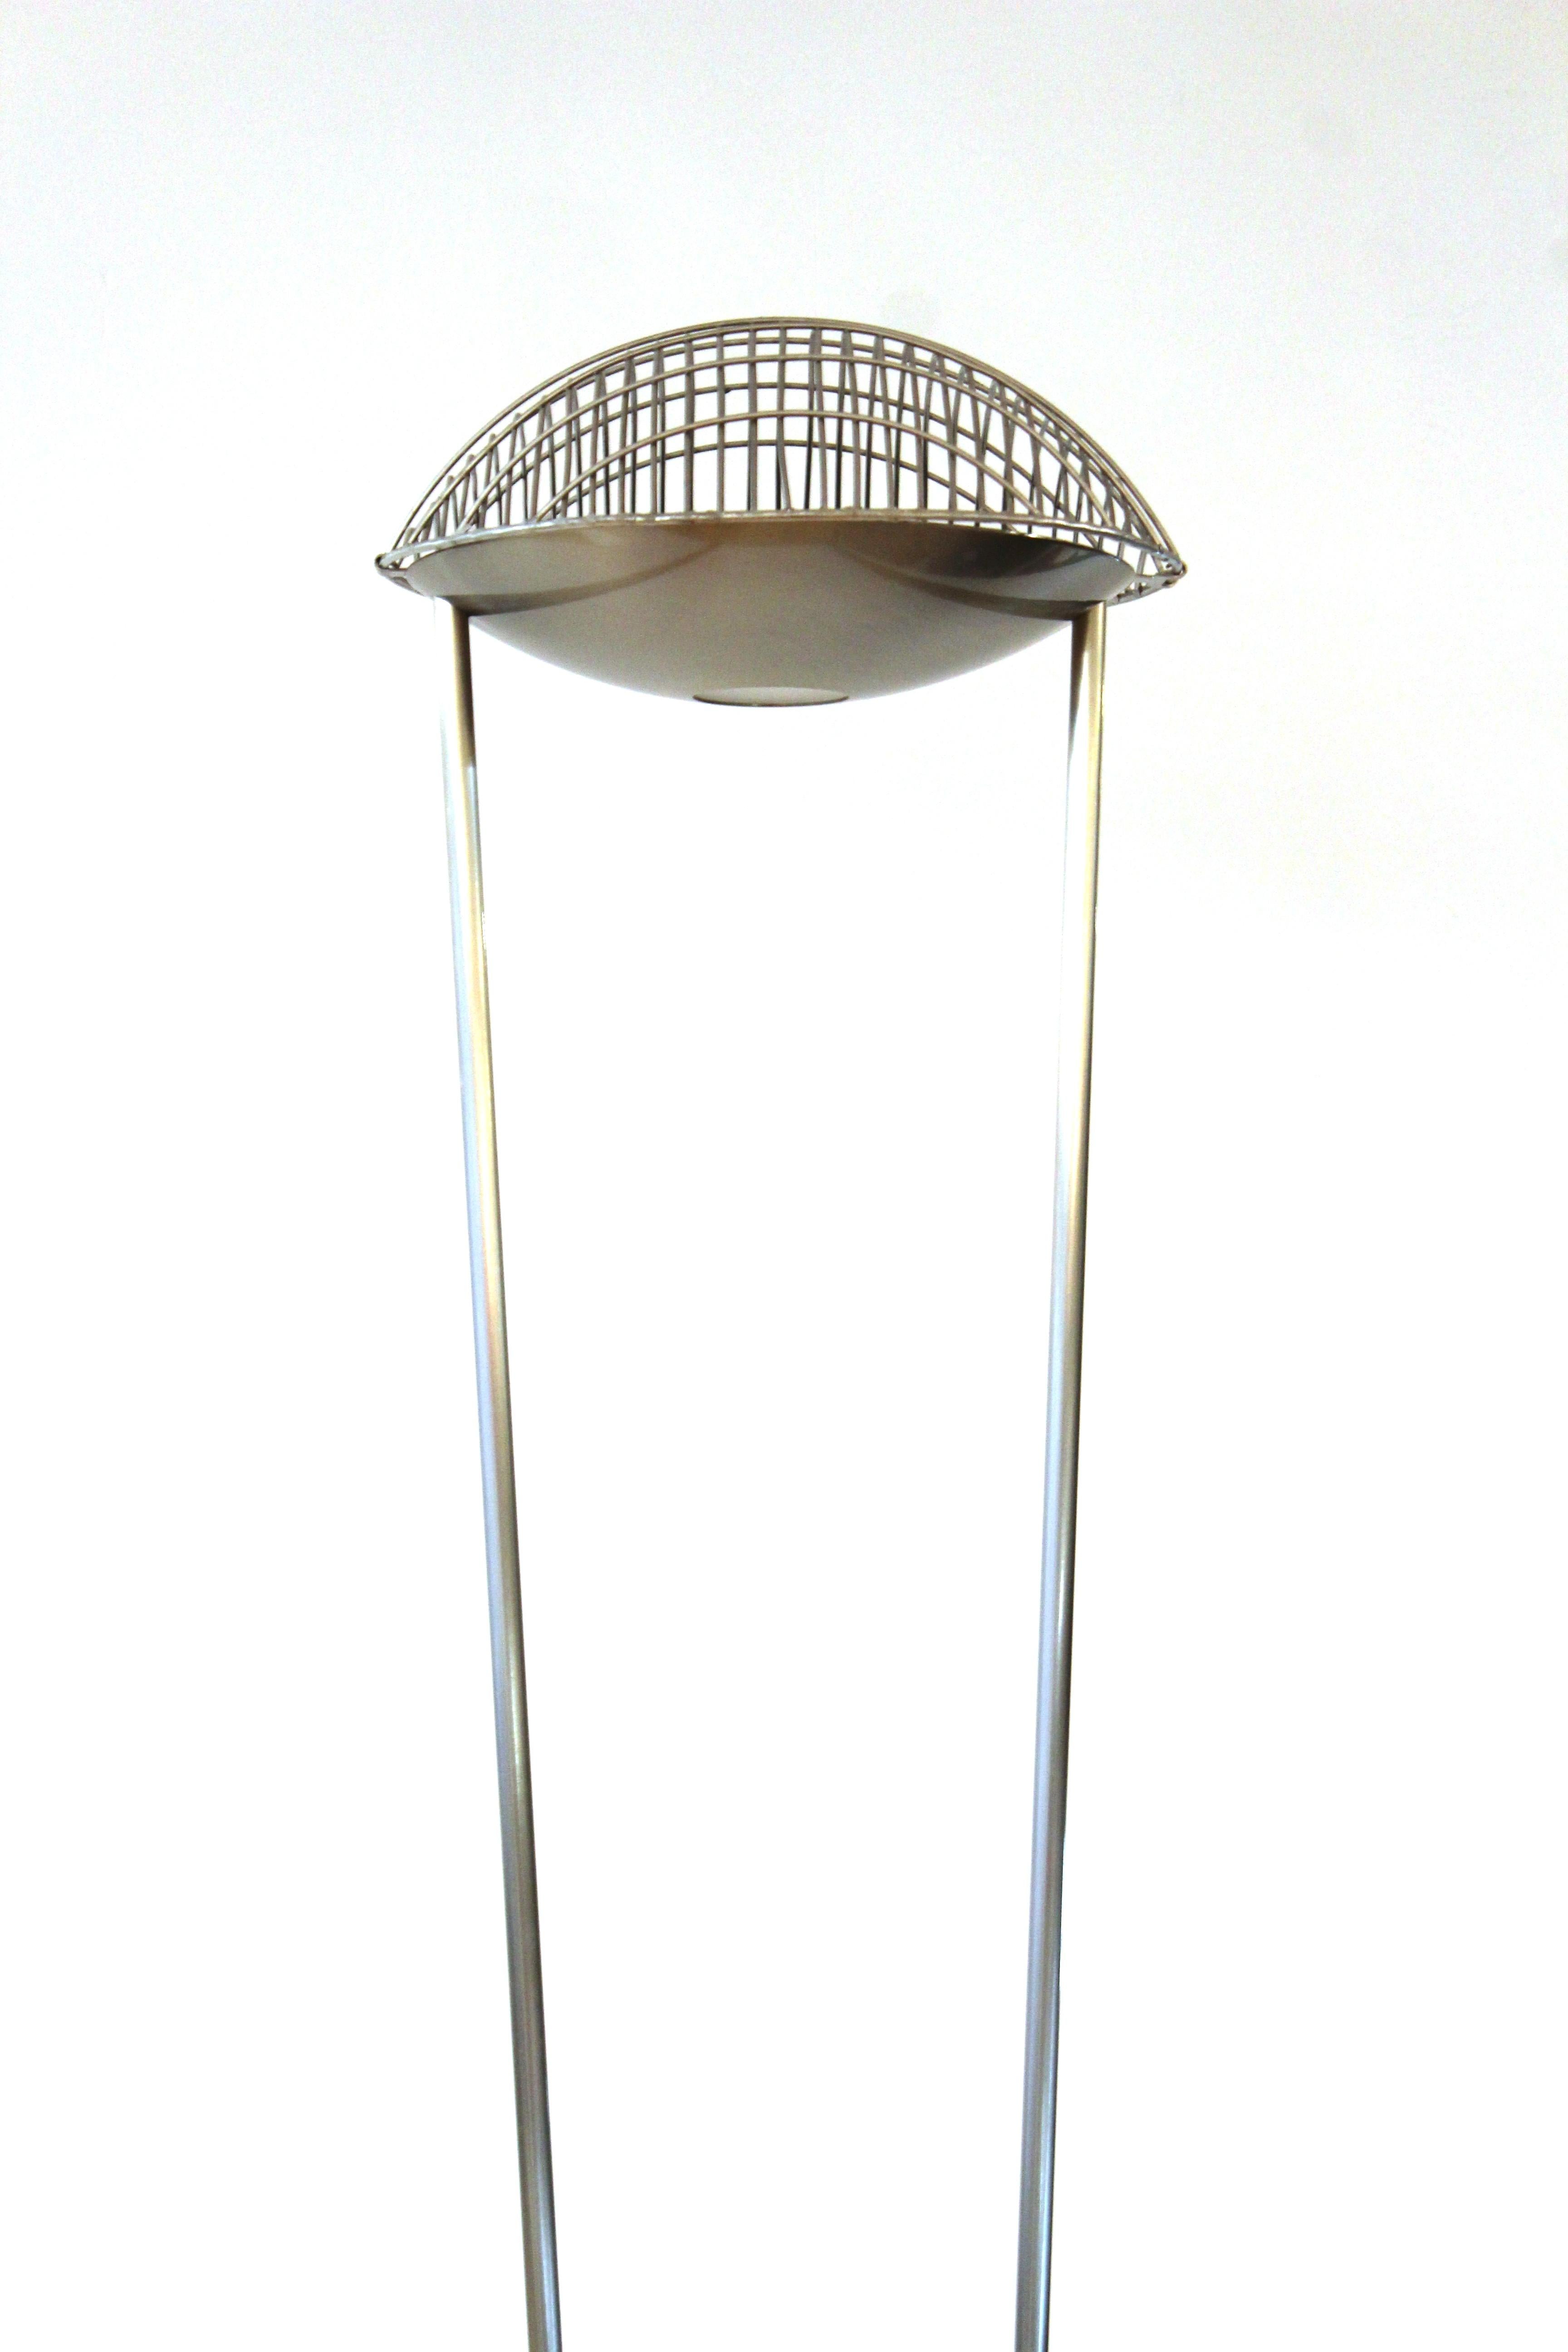 Spanish modern floor light designed by Estiluz. The piece has a double metal stem with a stabilizer and a grille on top of the light. Estiluz mark on top near the light. In great vintage condition with age-appropriate wear and use.